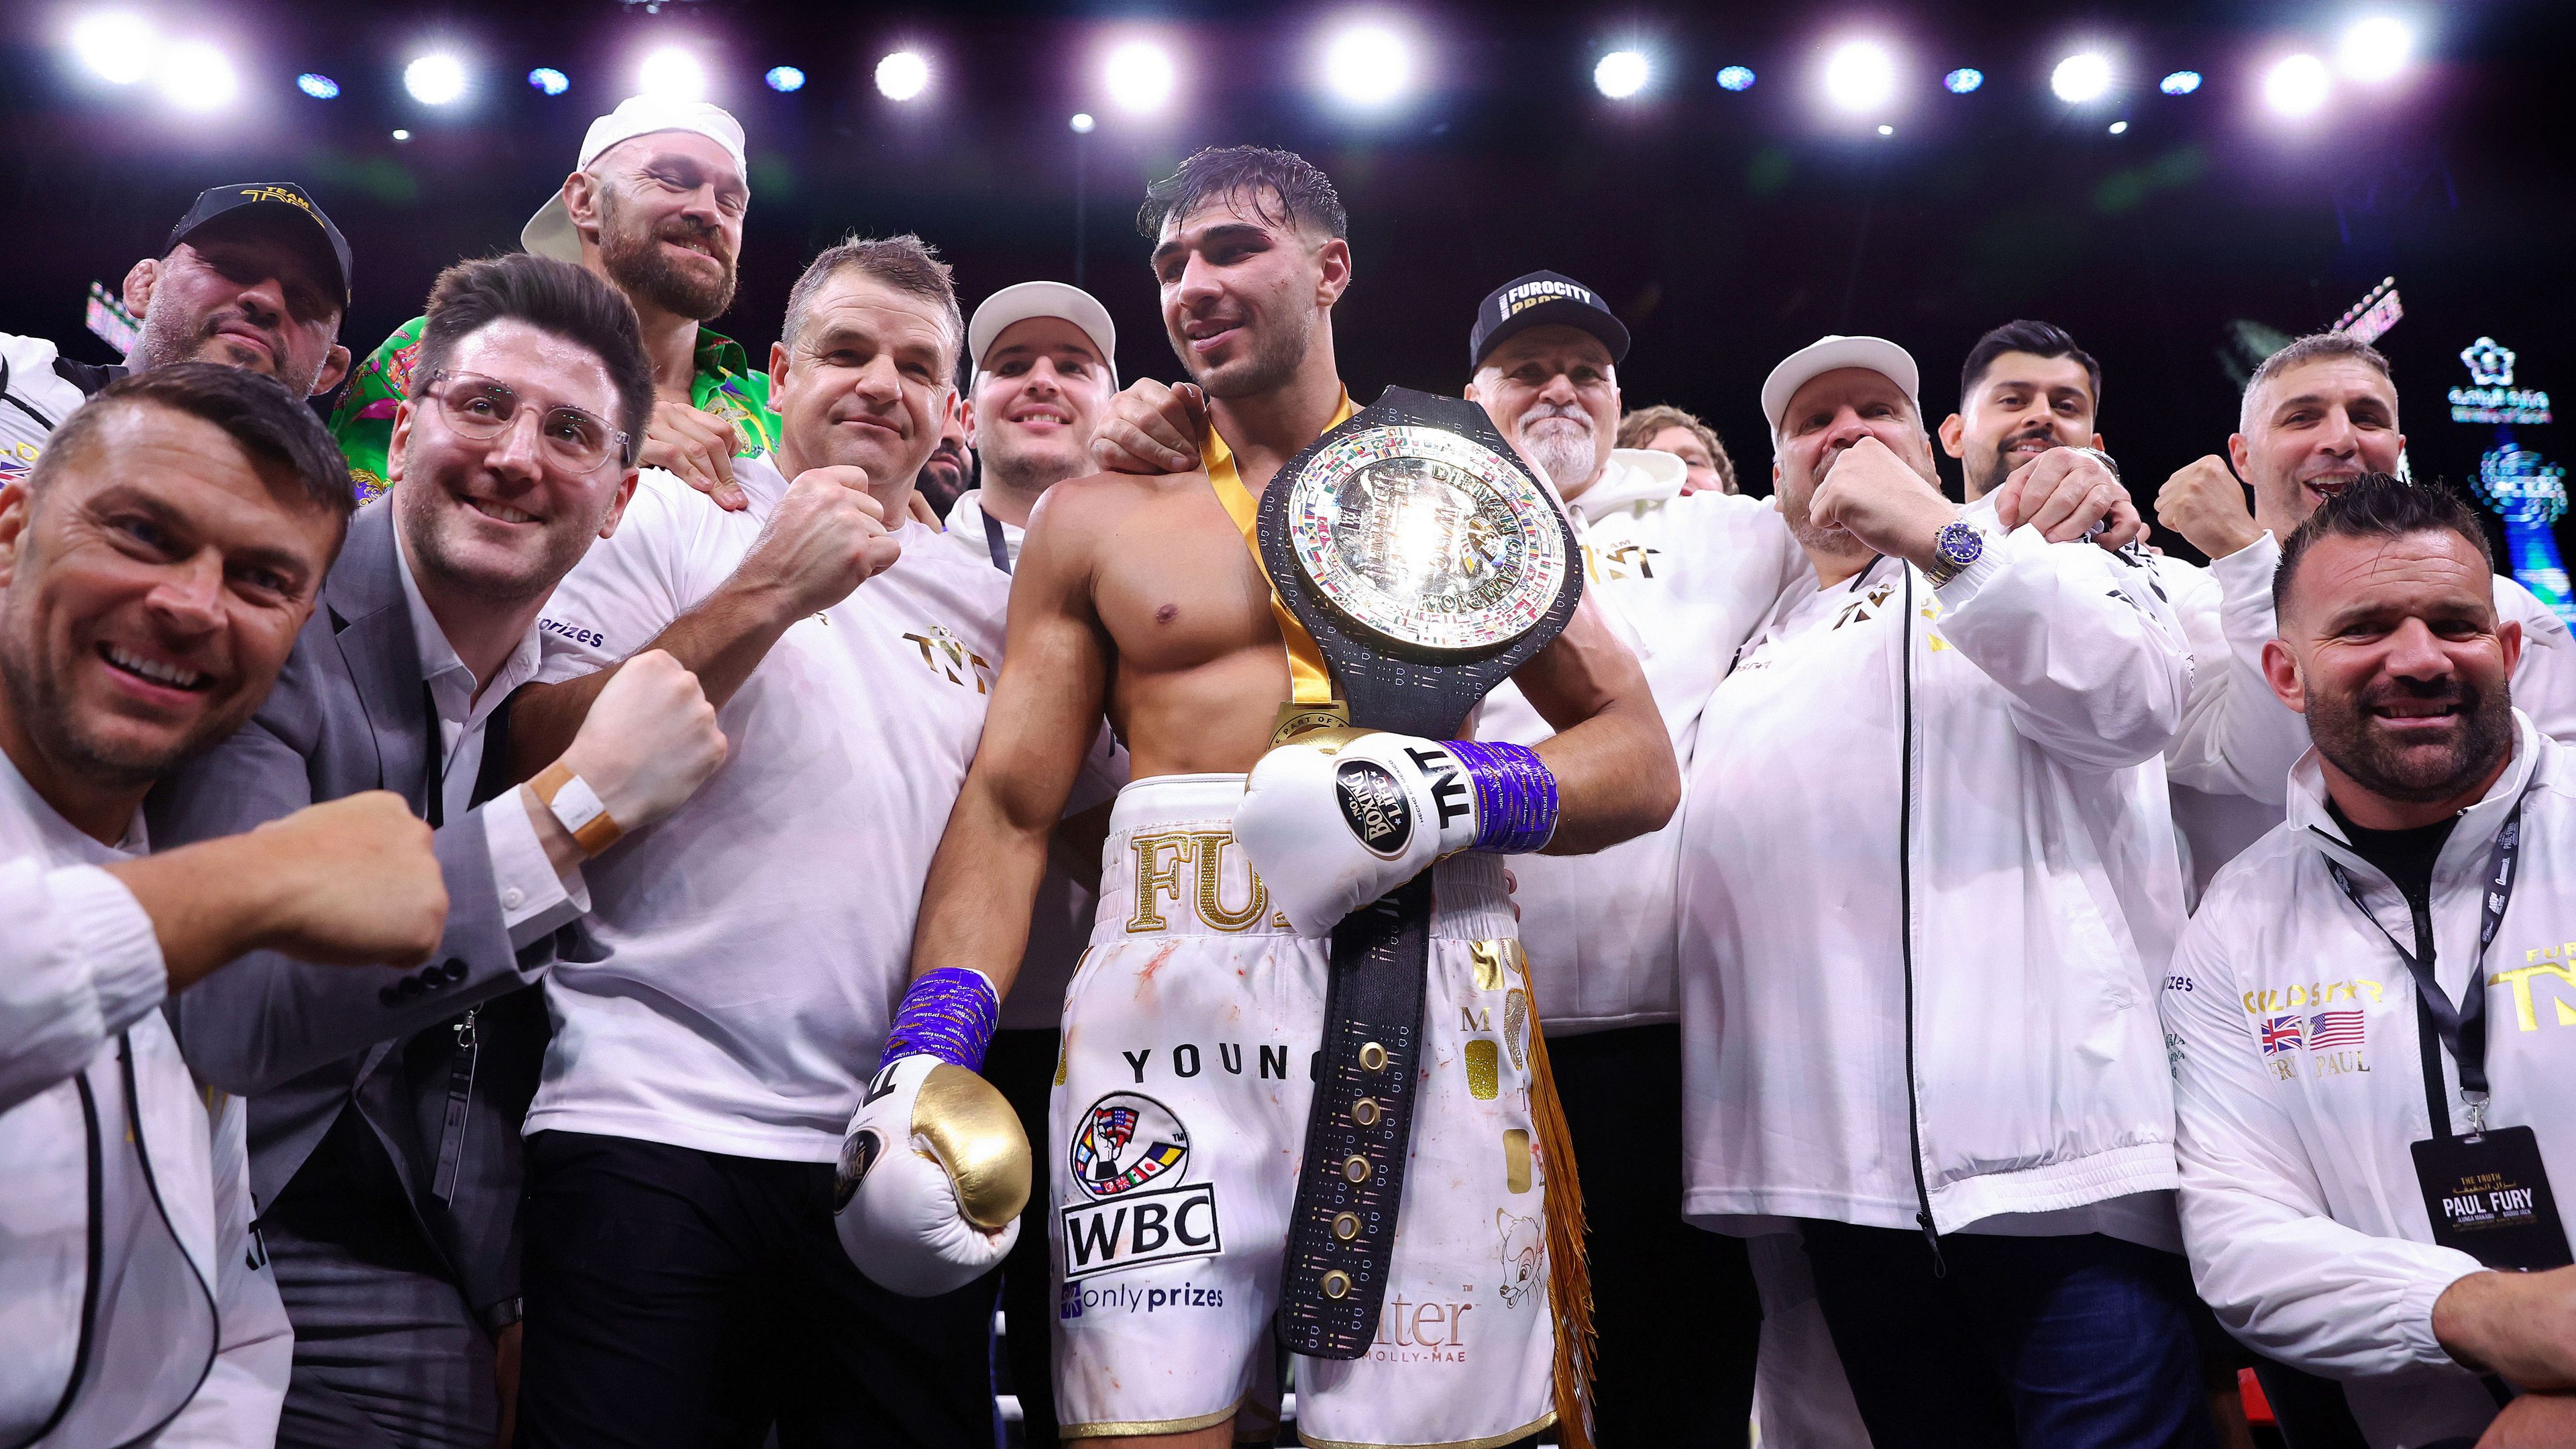 Tommy Fury celebrates with his team as they pose for a photo with their title belt after he defeated Jake Paul.